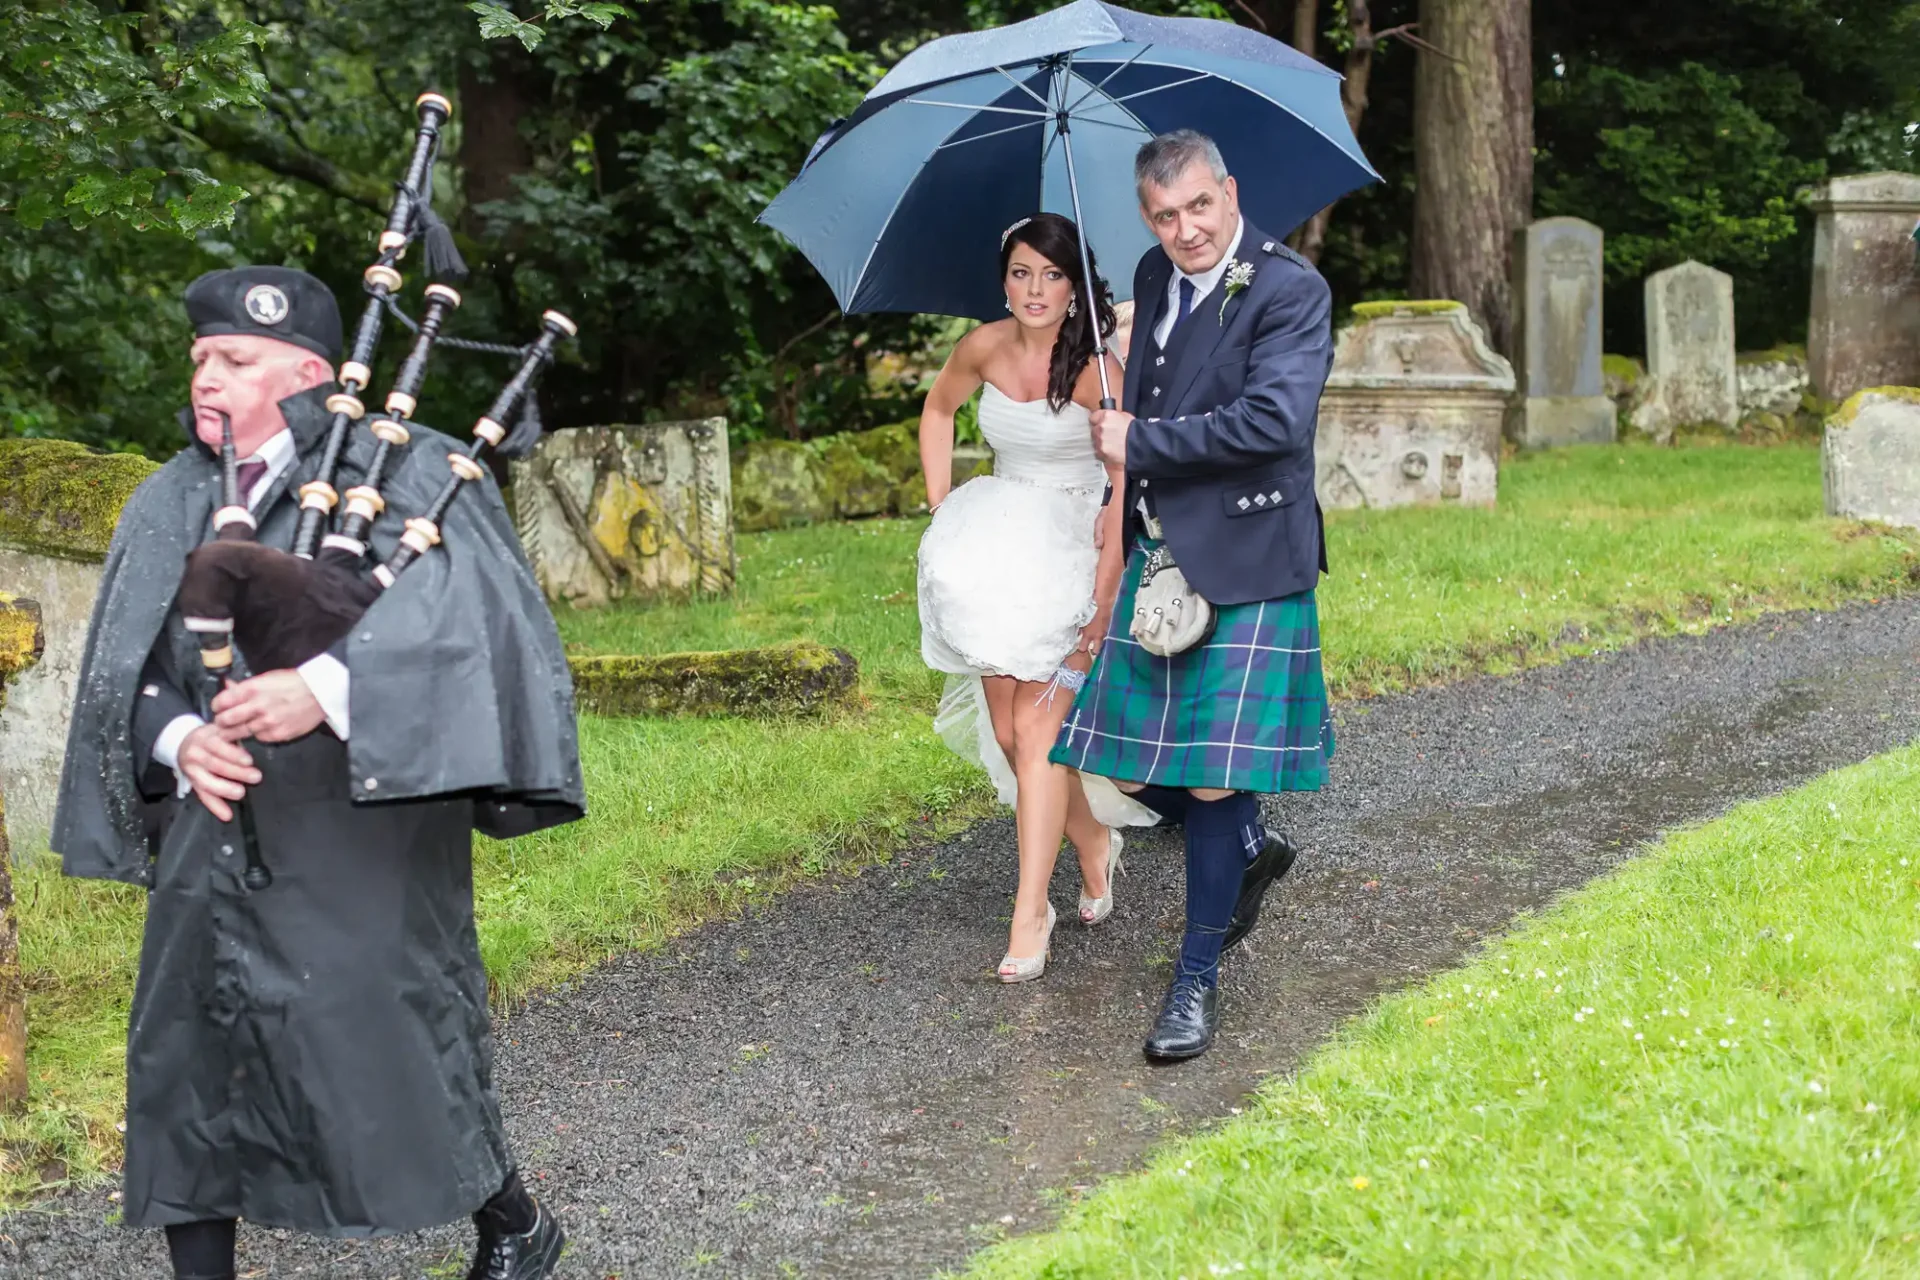 A bride and groom, the man in a kilt, walk under an umbrella led by a bagpiper on a rainy day.